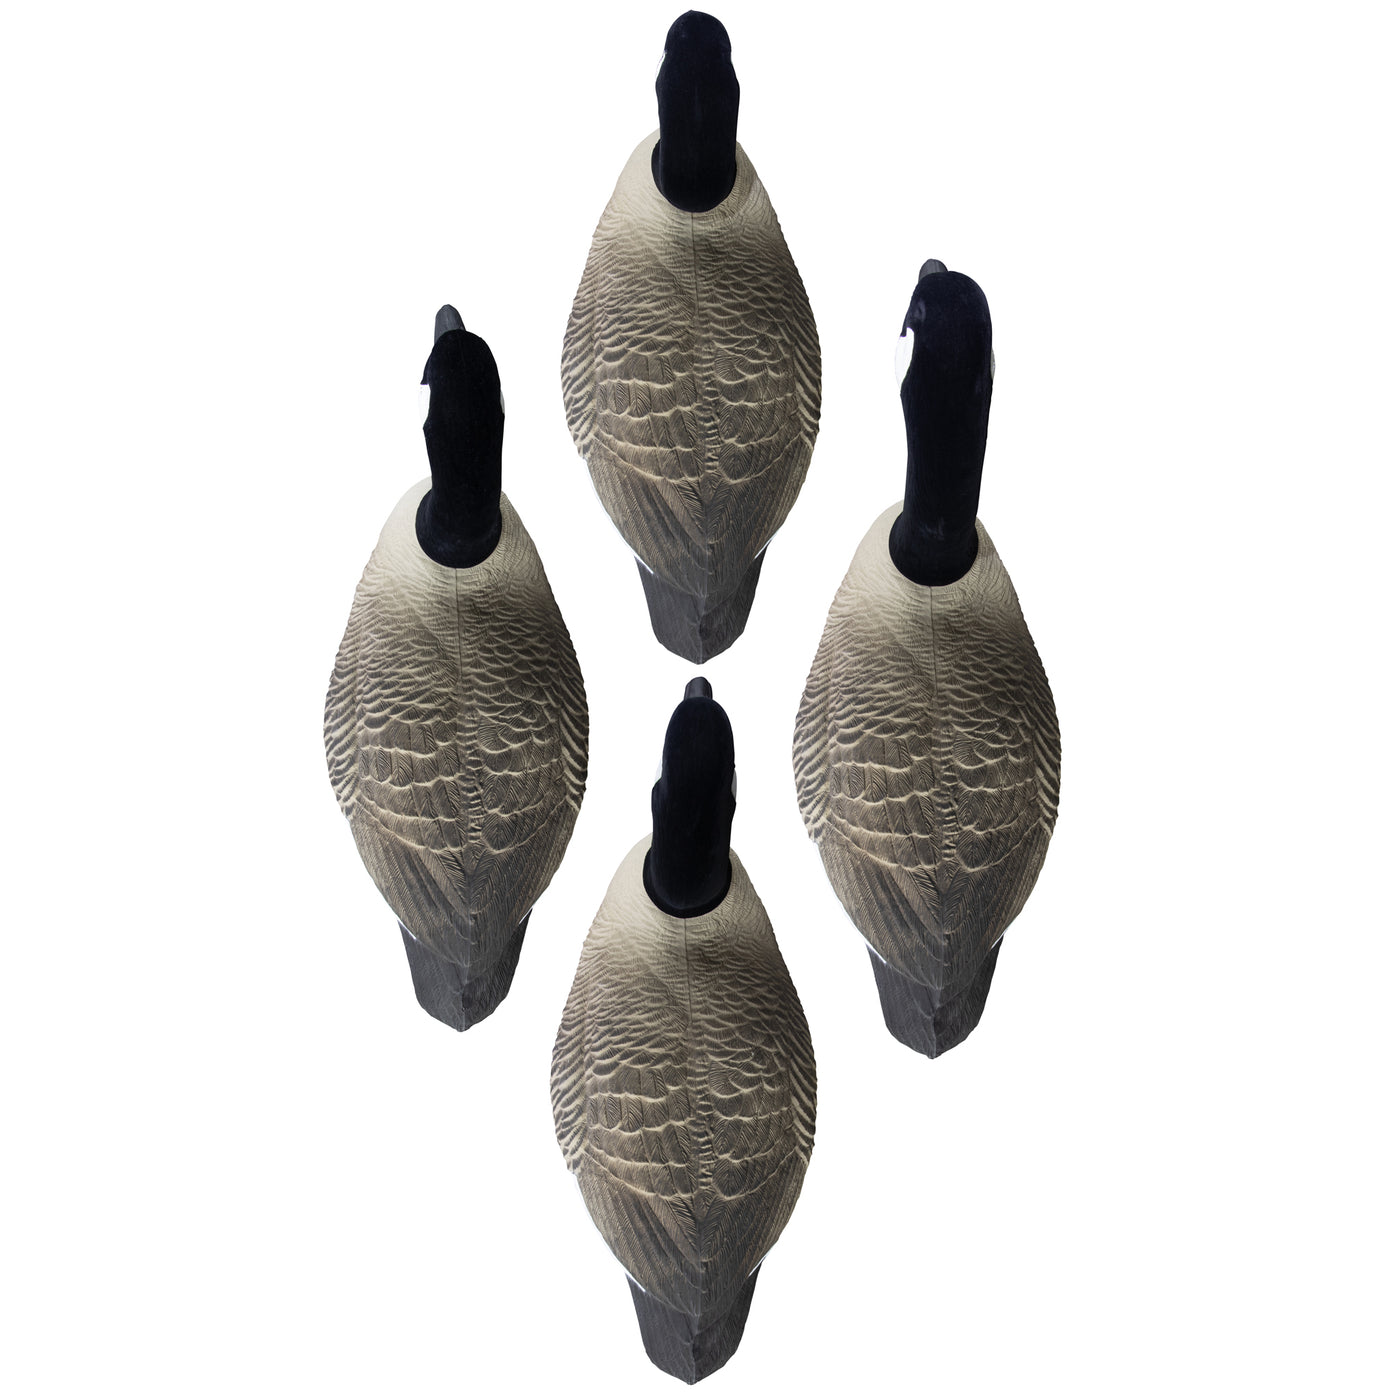 Full-Size Goose Floater-Canada